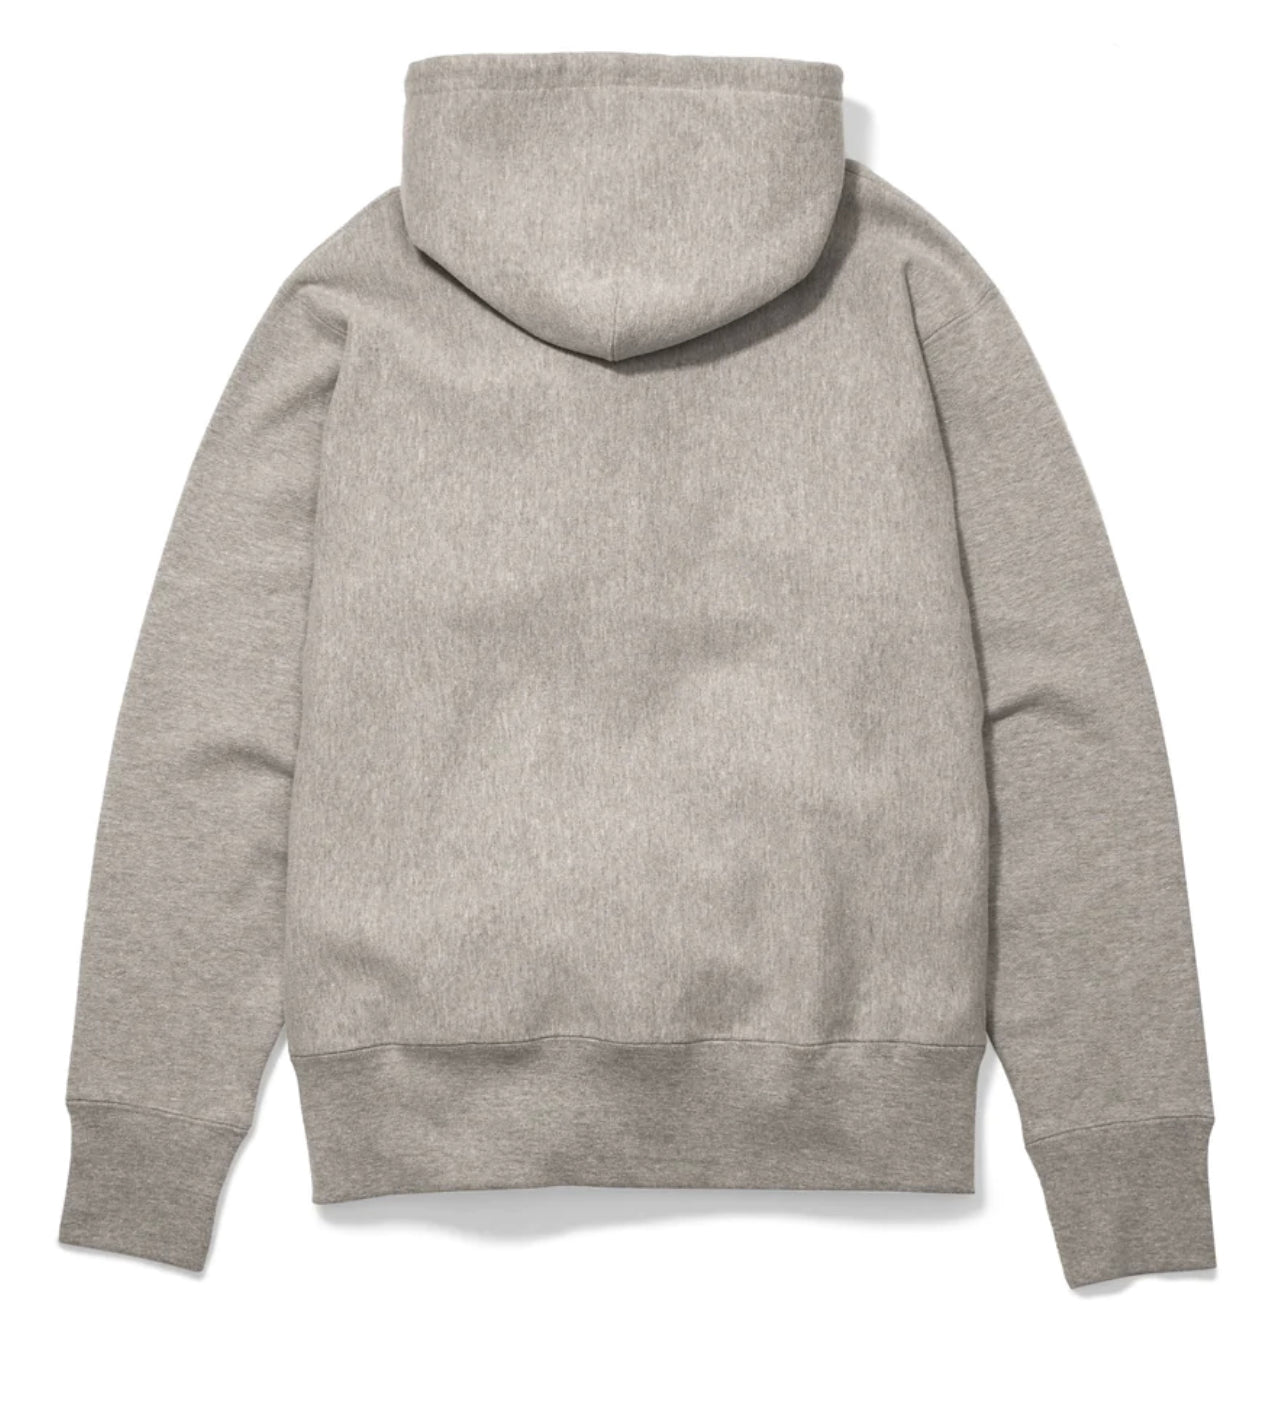 ARMOIRE Signature Classis Heavyweight Hoodie